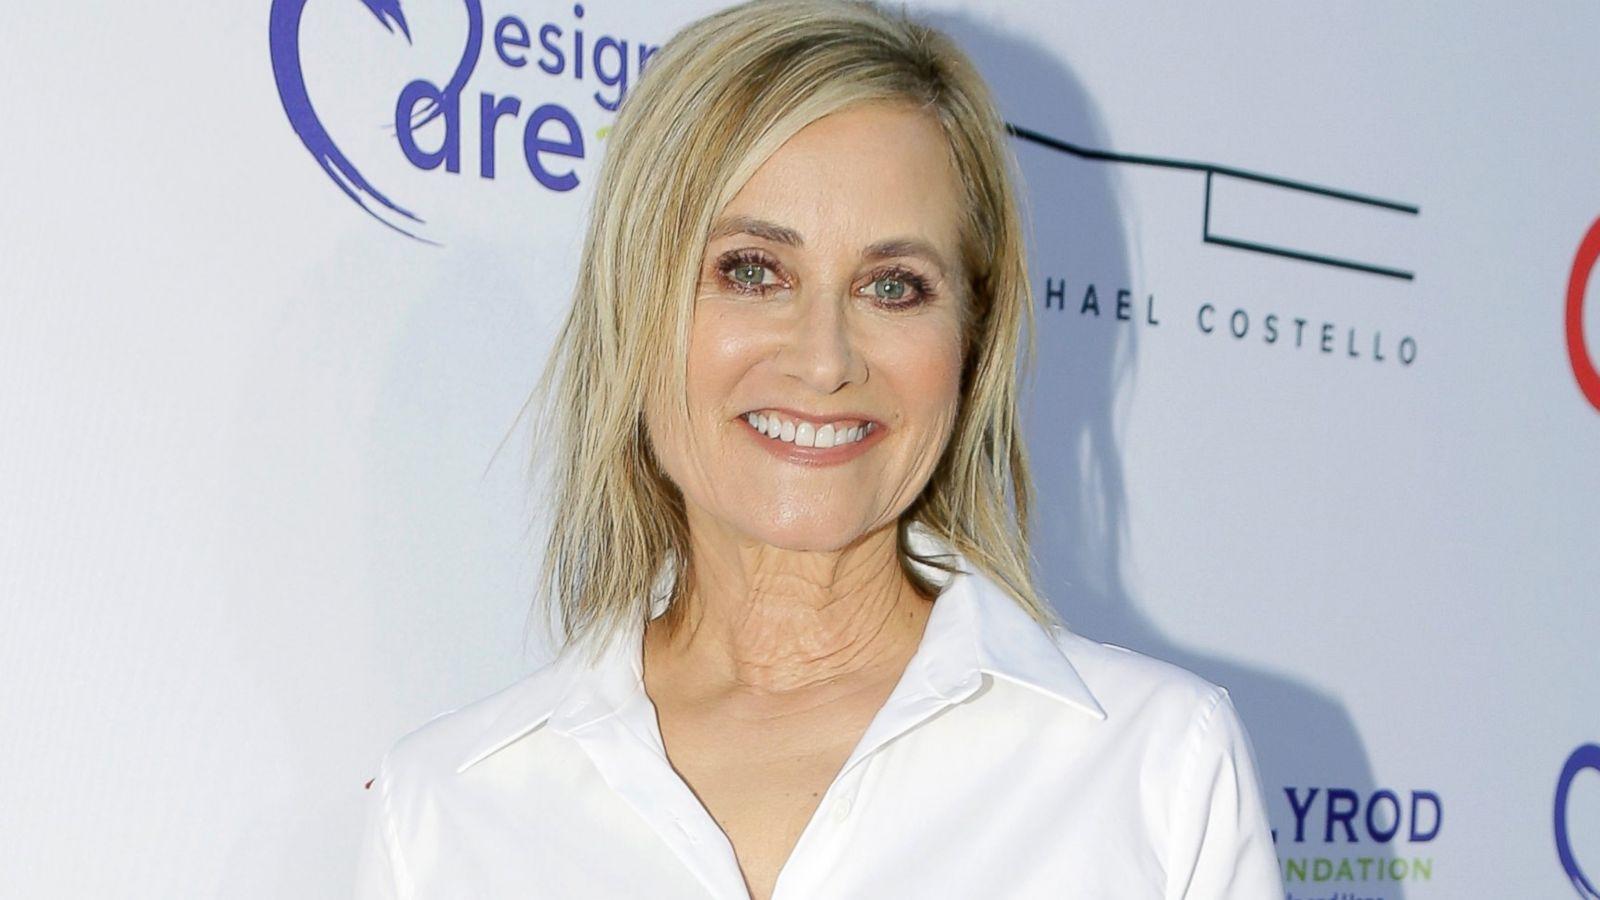 DWTS': 'The Brady Bunch' Actress Maureen McCormick Eliminated